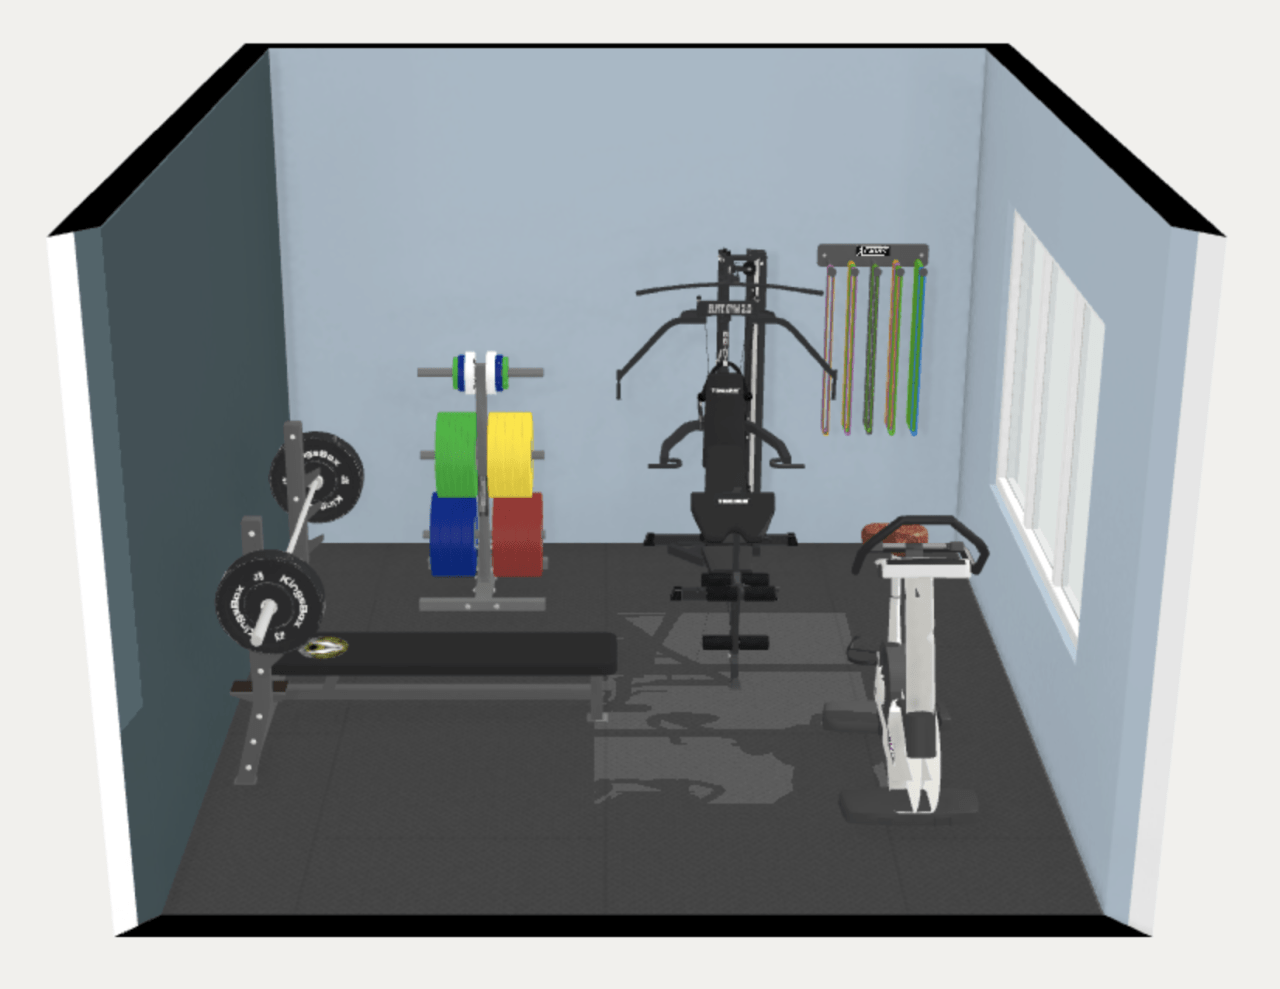 12' x 12' 150 square feet home gym floor plan. 3d. With bench press and multi-gym.